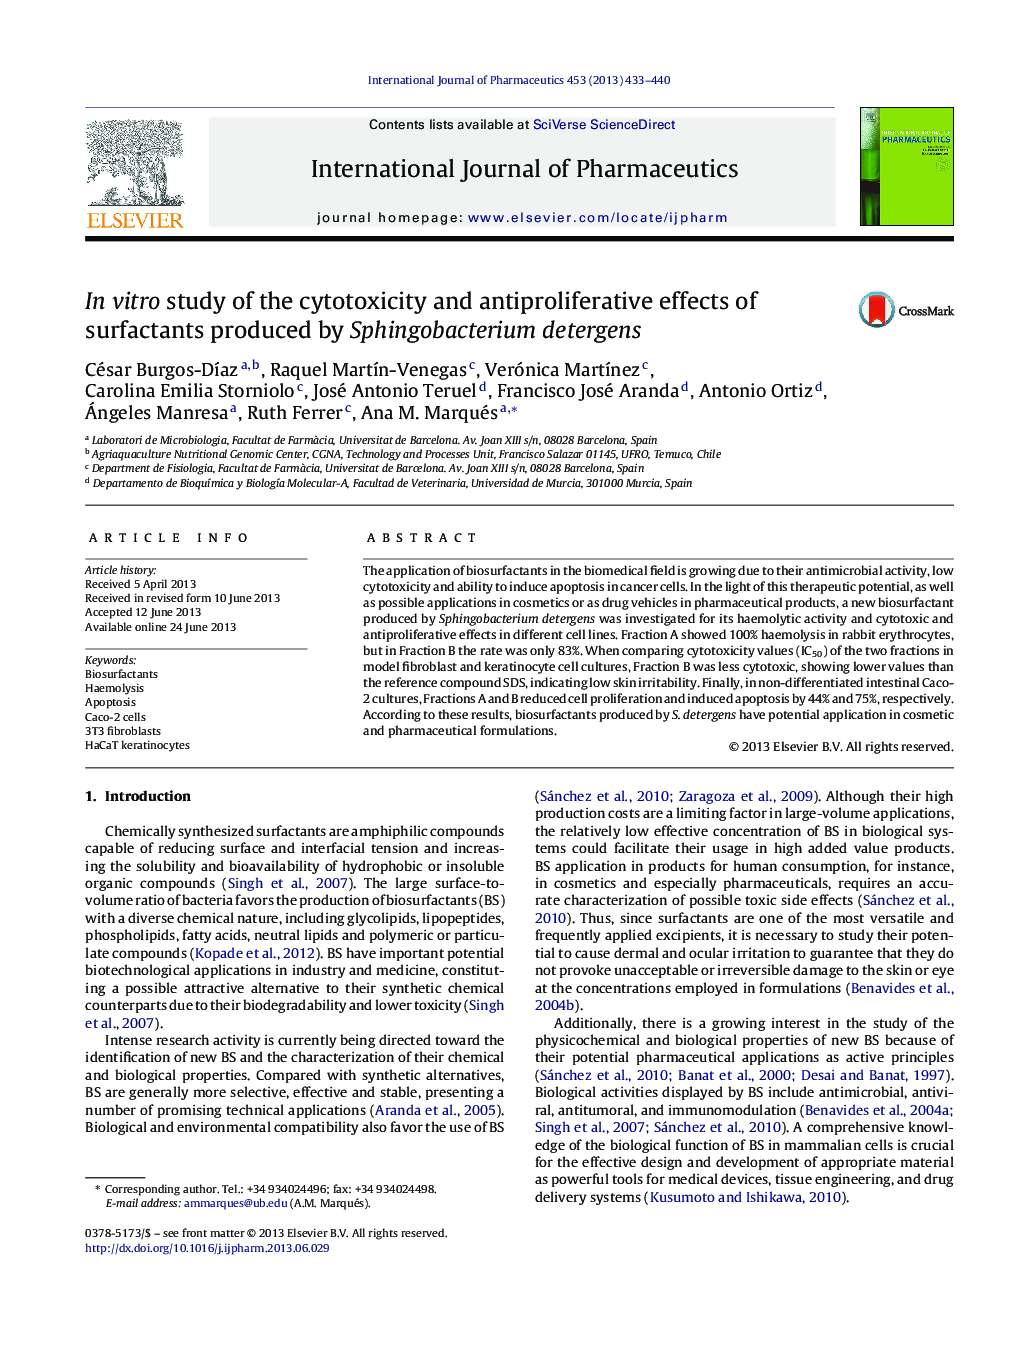 In vitro study of the cytotoxicity and antiproliferative effects of surfactants produced by Sphingobacterium detergens